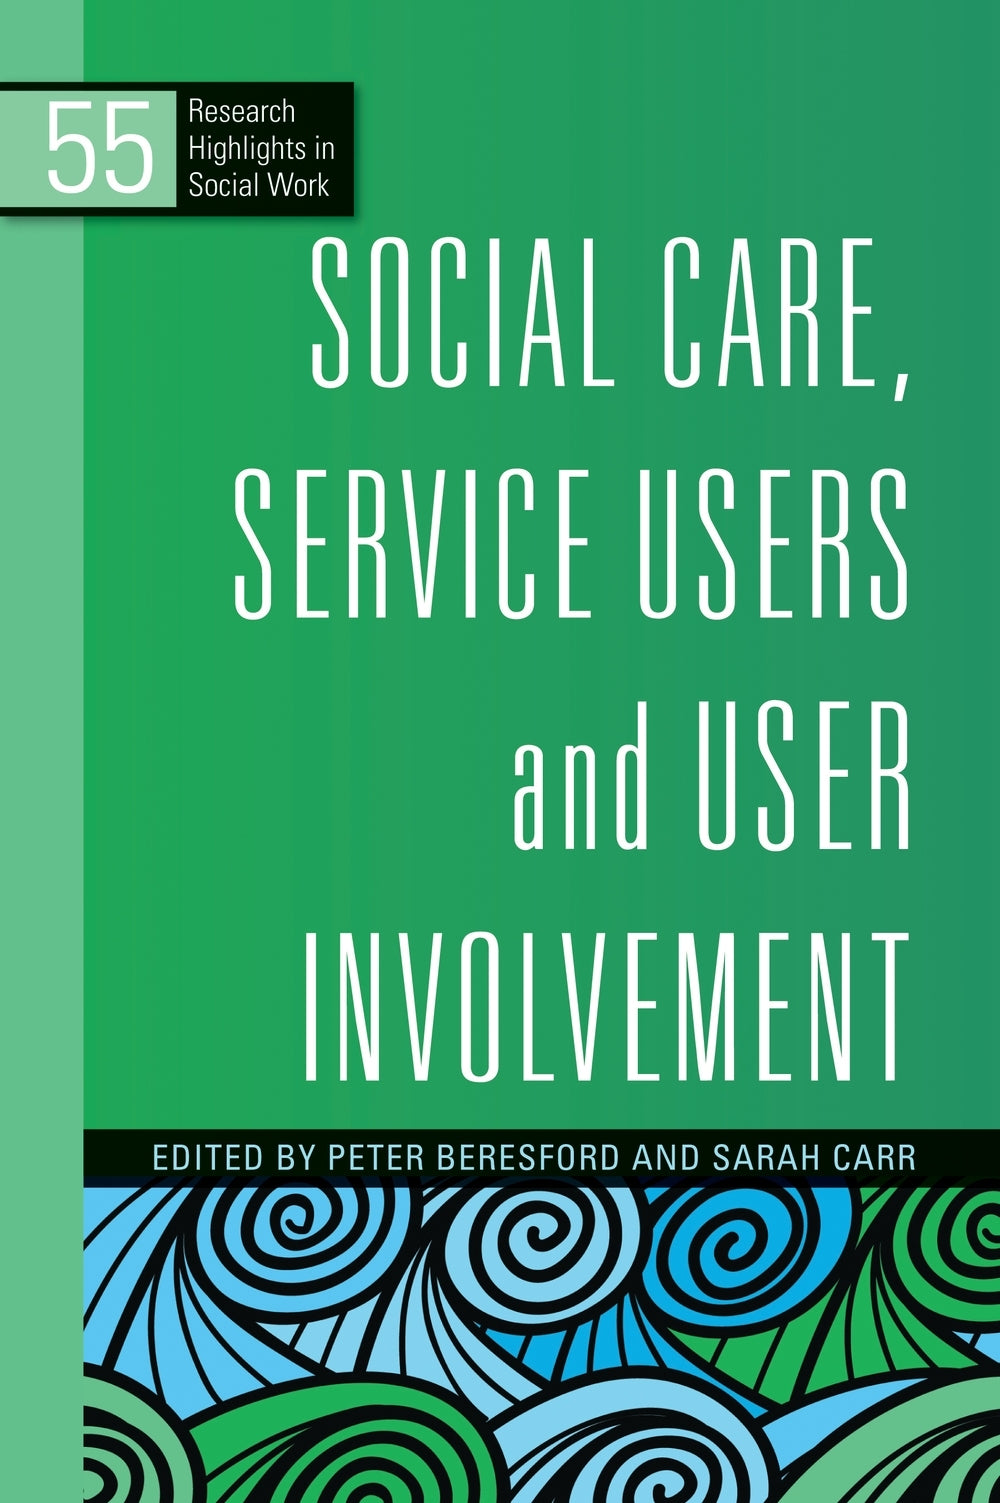 Social Care, Service Users and User Involvement by Sarah Carr, Peter Beresford